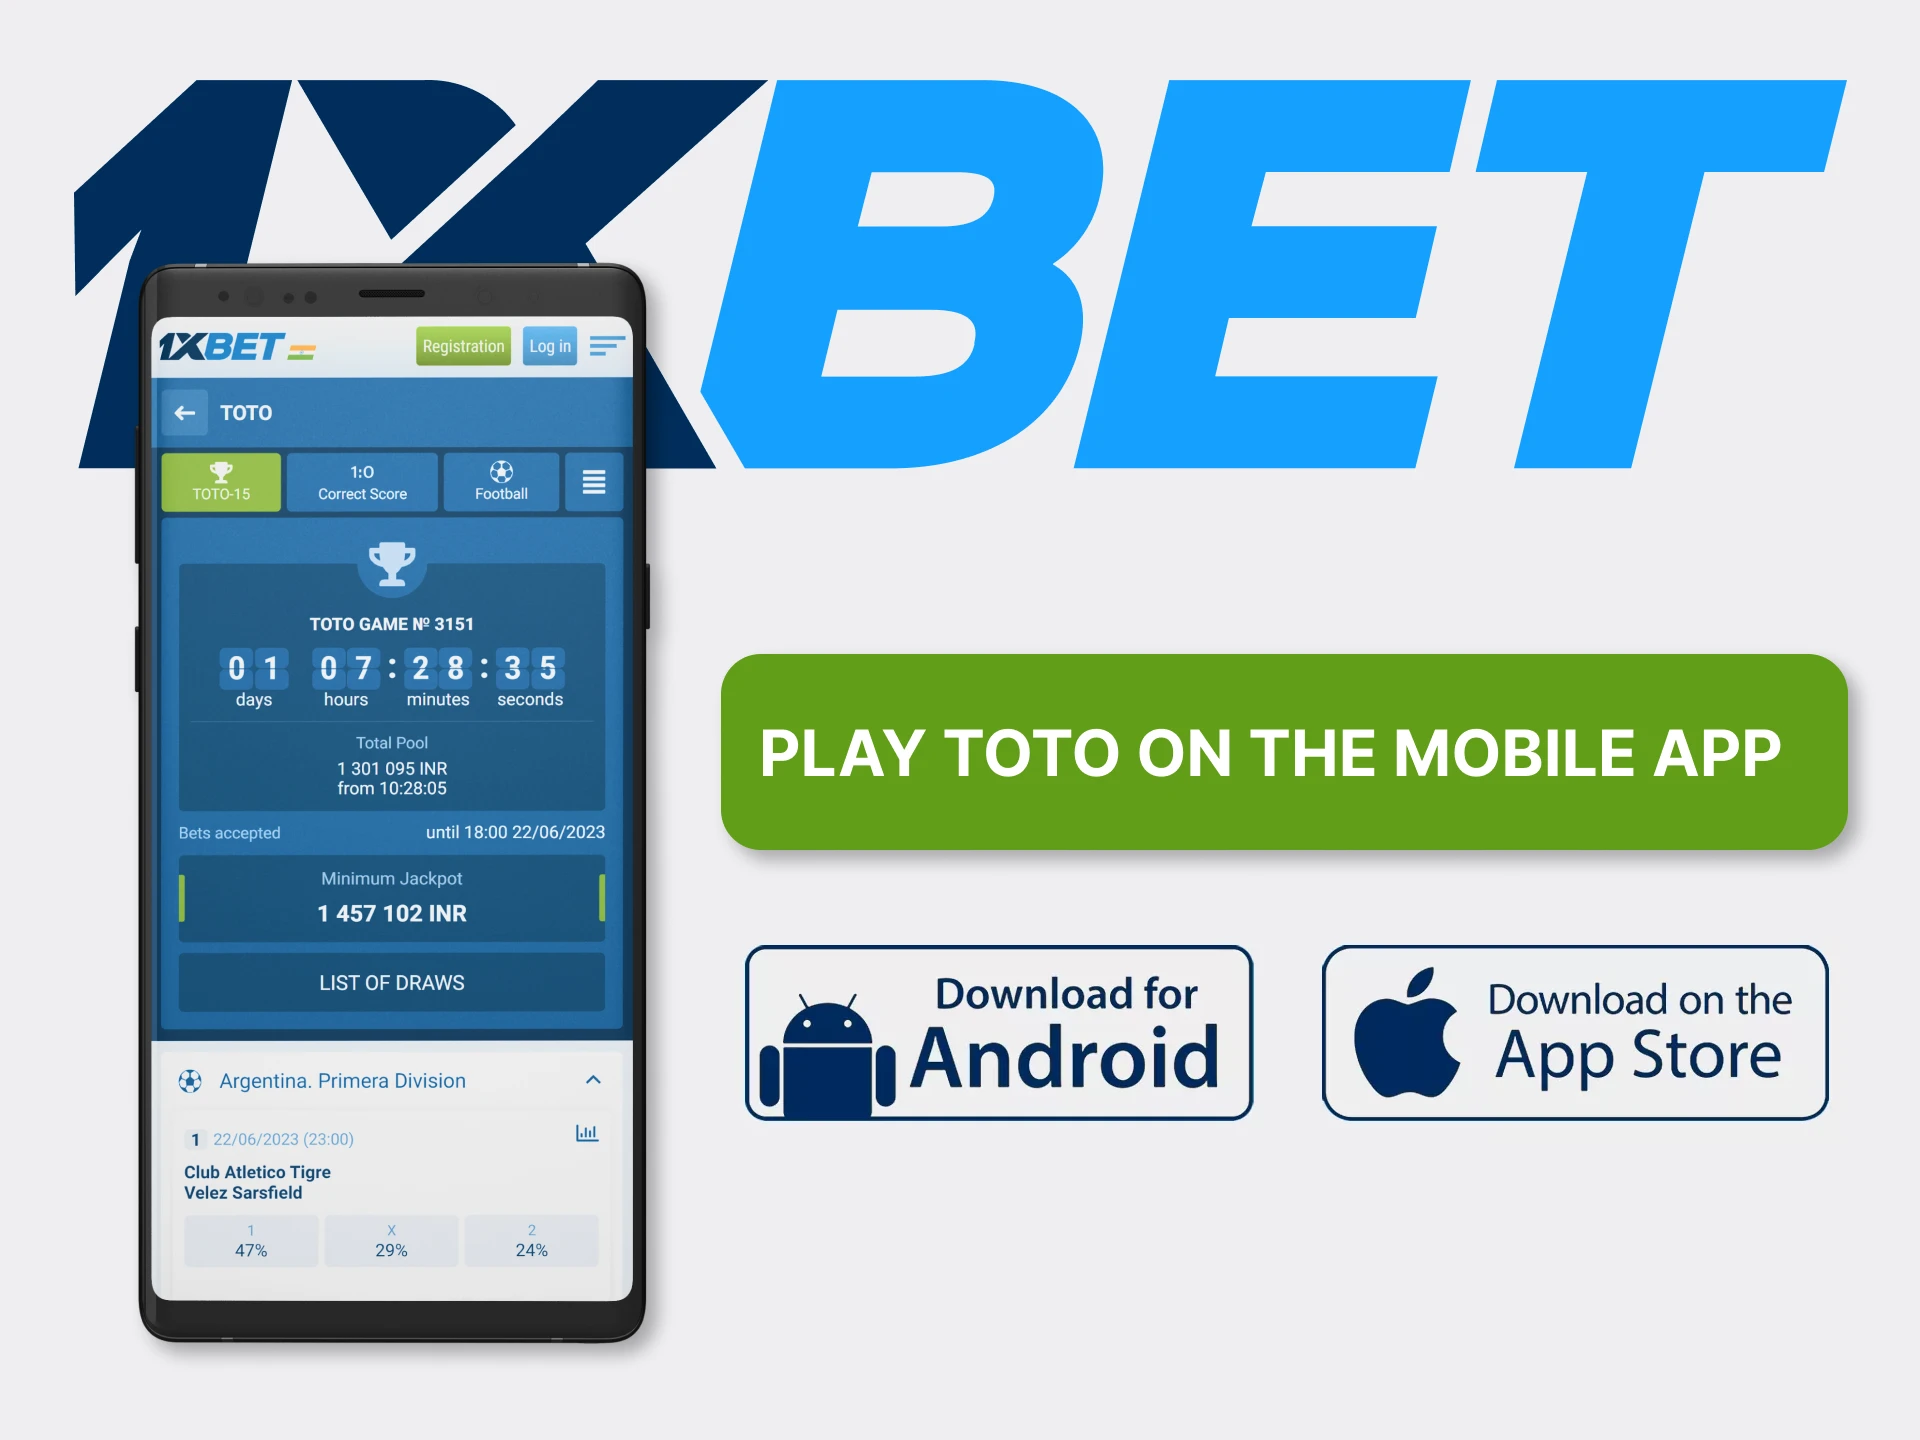 Betting on the TOTO in 1xBet is easy in the mobile app for Android and iOS.